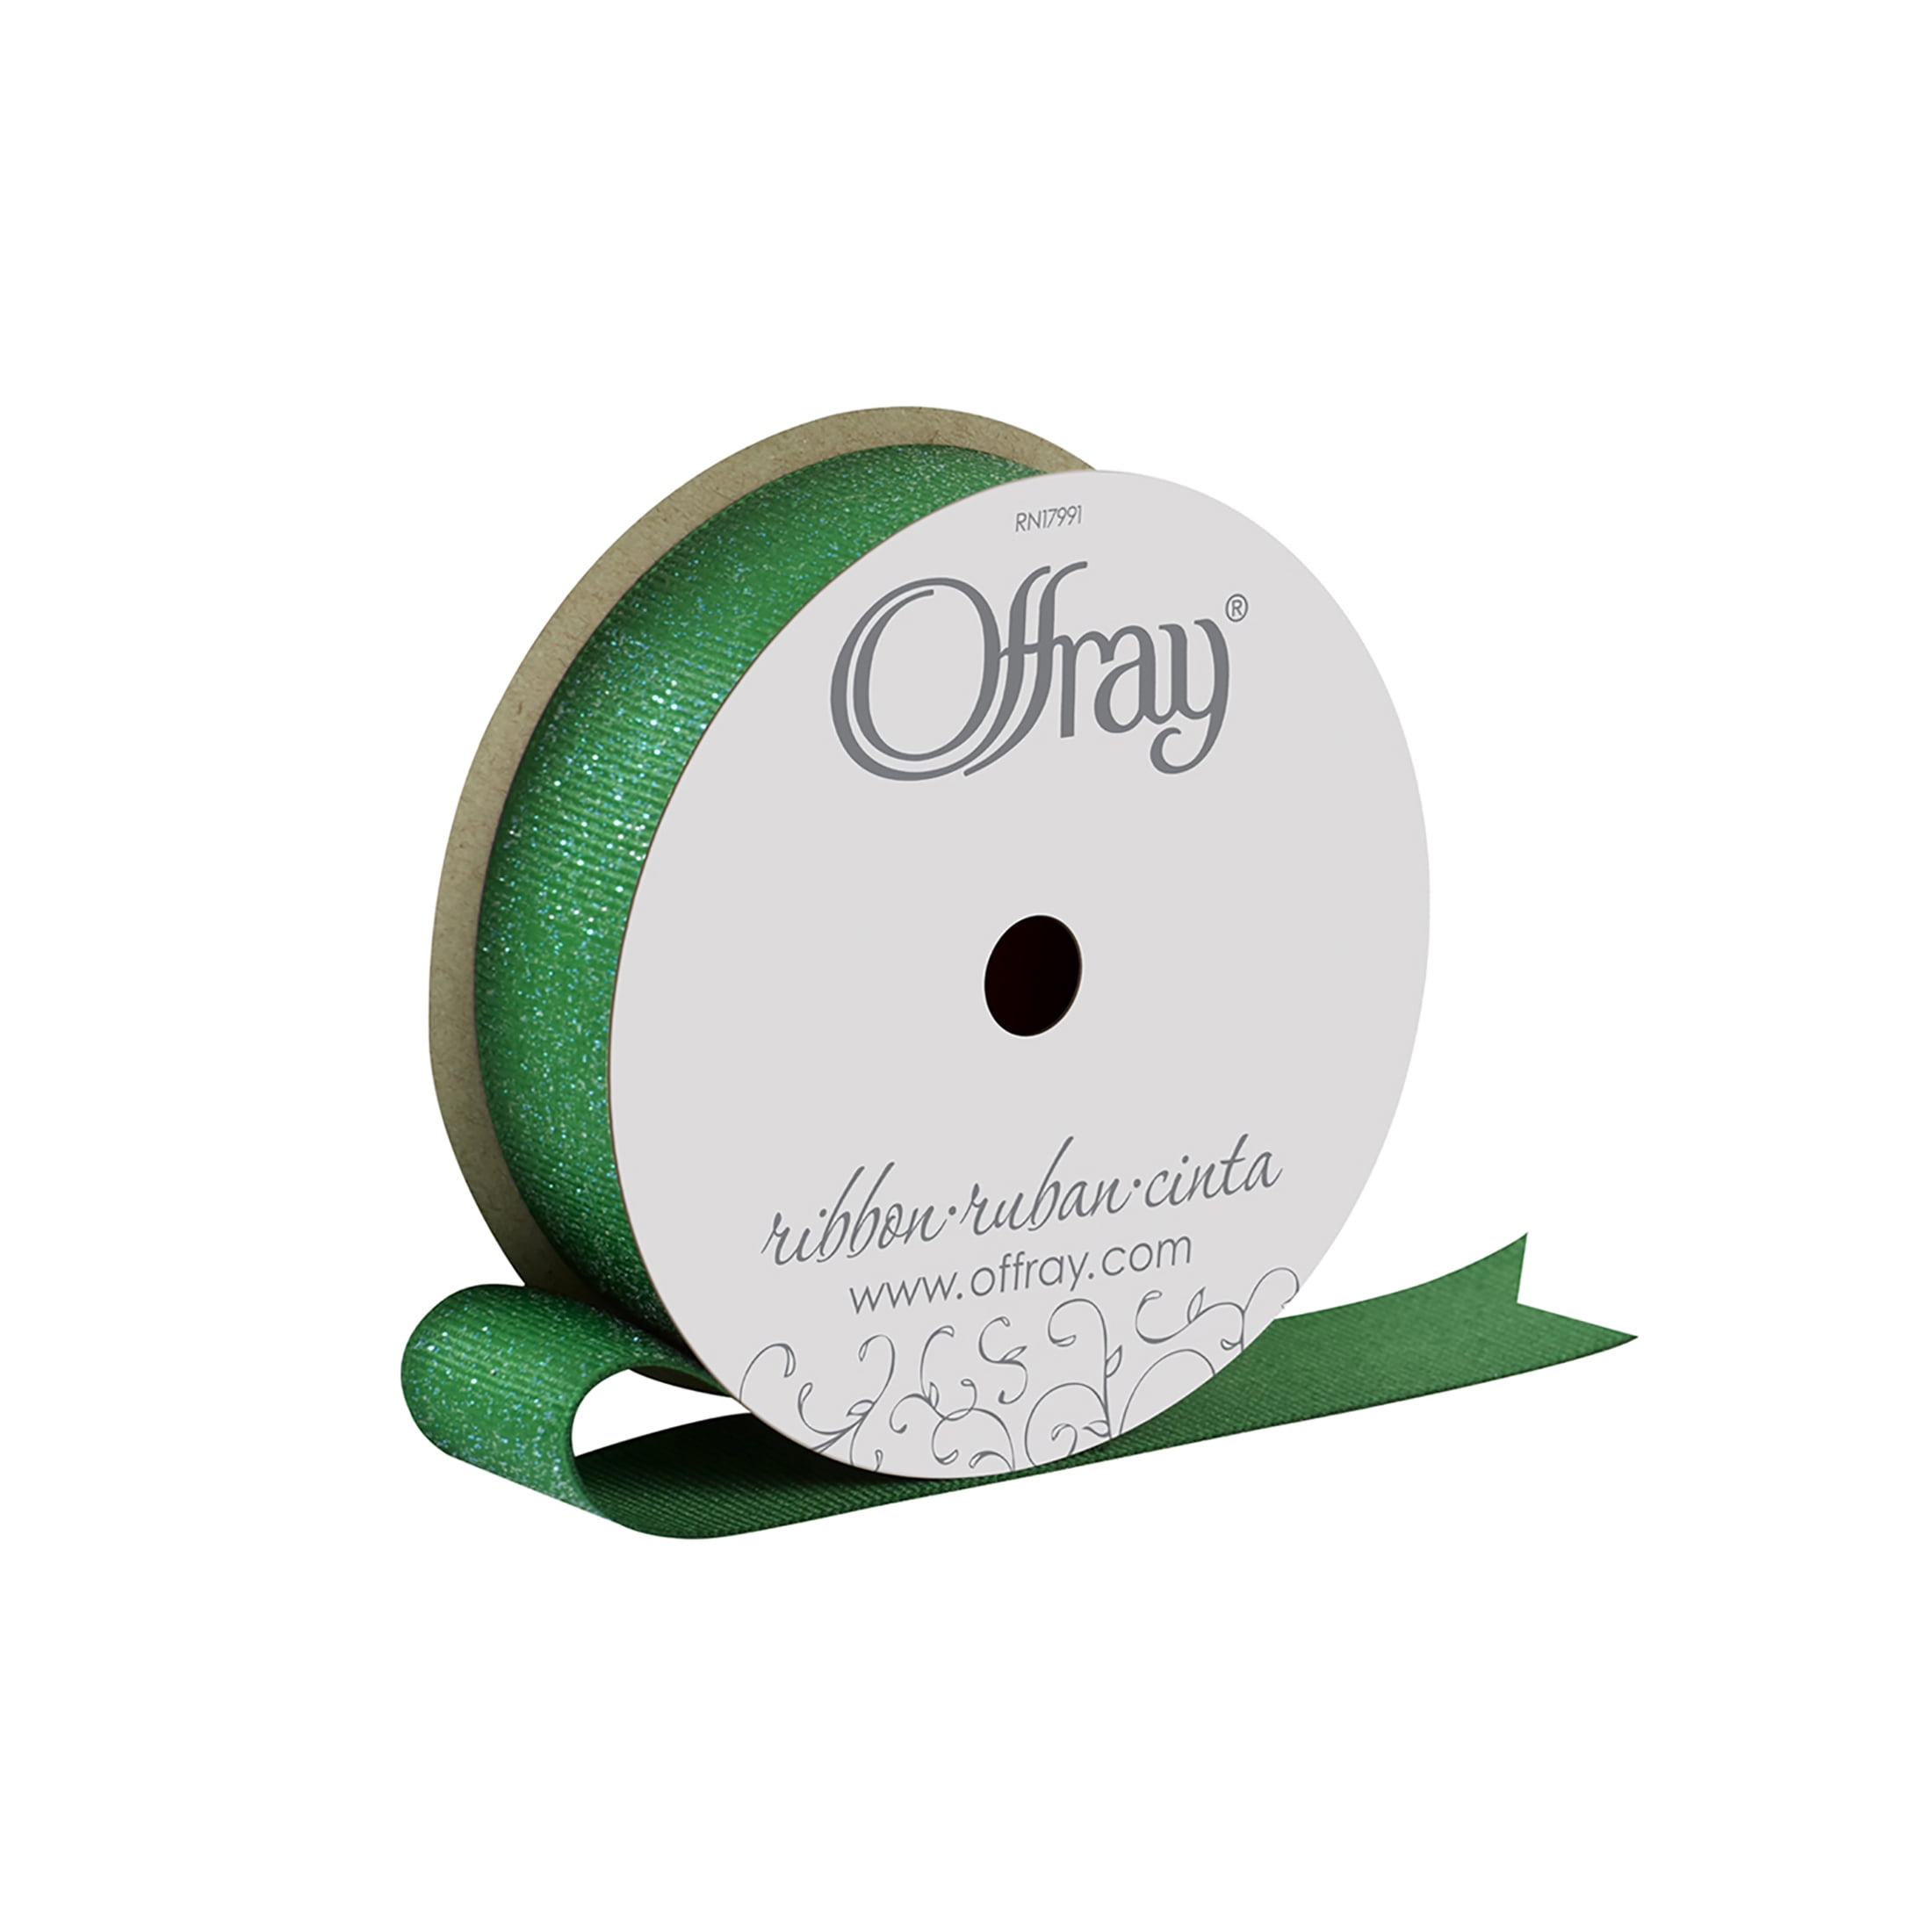 Offray Ribbon, Emerald Green 7/8 inch Grosgrain Glitter Polyester Ribbon for Sewing, Crafts, and Gifting, 9 feet, 1 Each